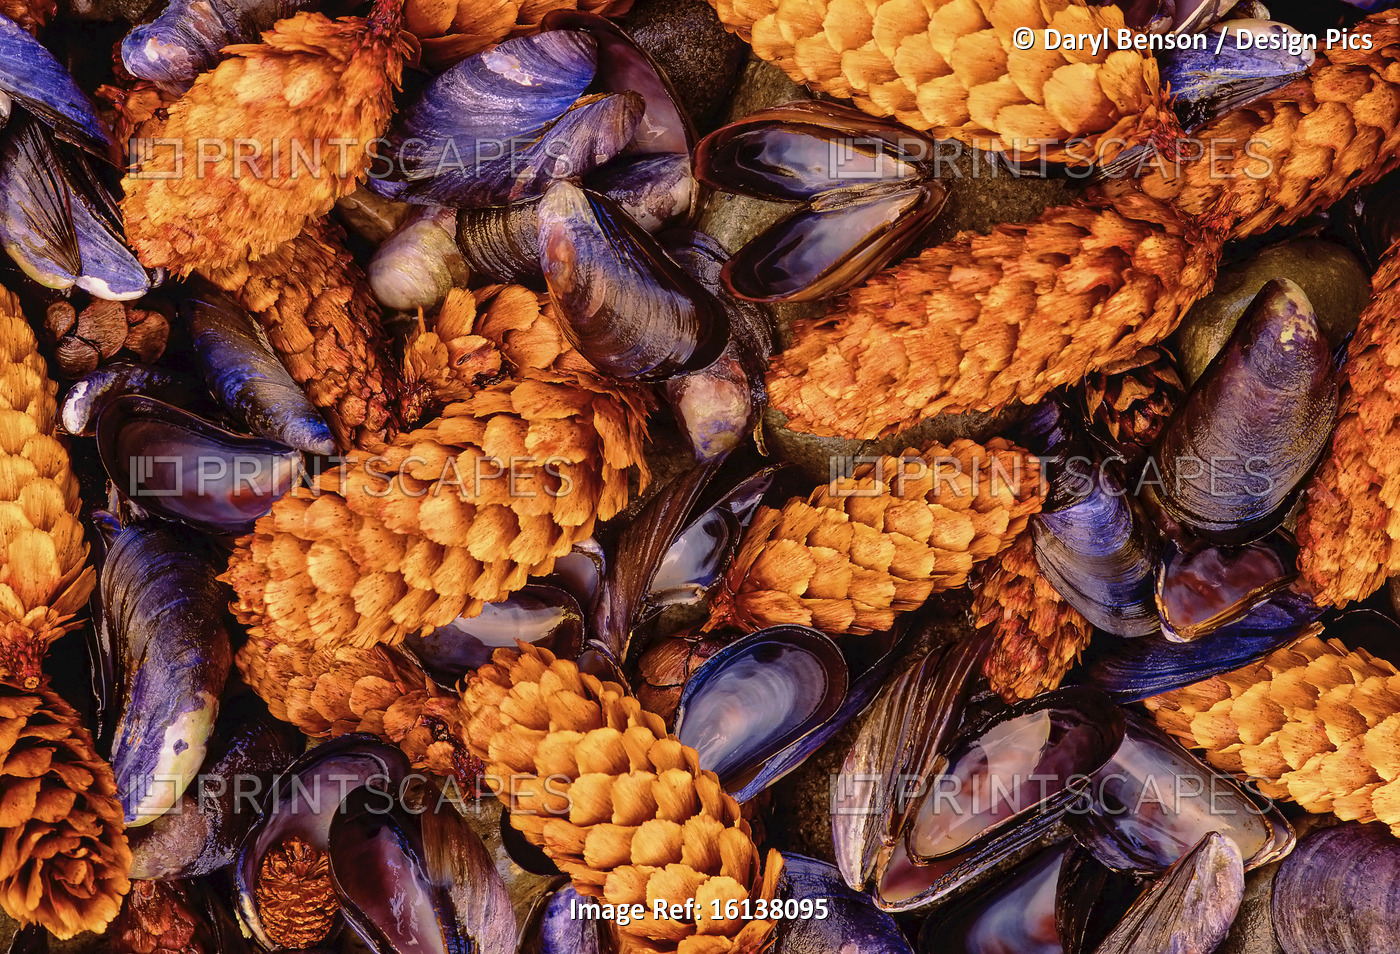 Pine Cones and Mussel Shells